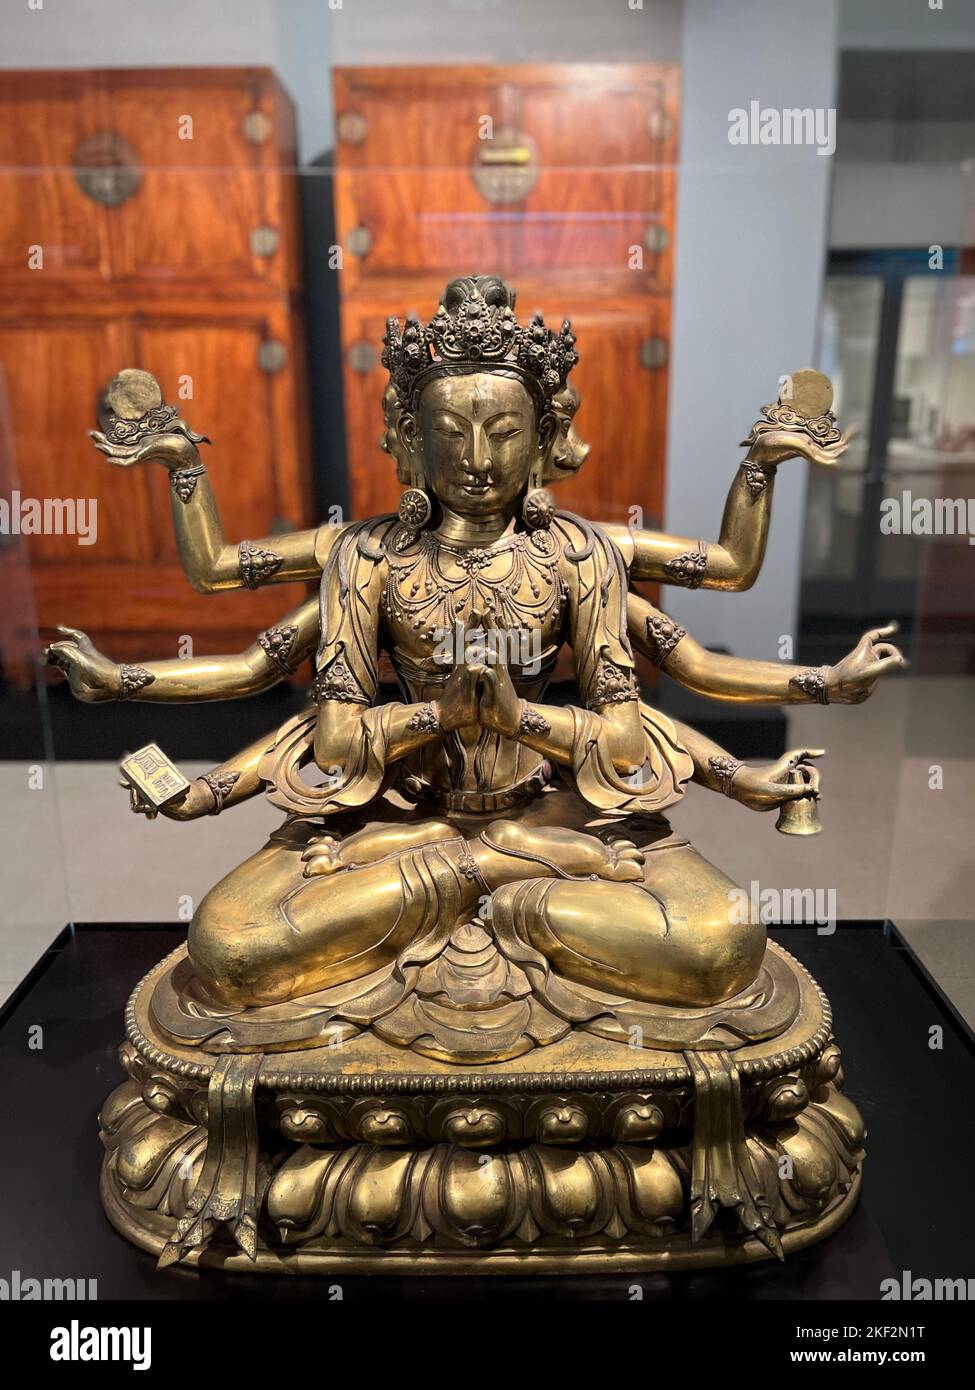 Marichi, Goddes of Dawn; China, Qing Dynasty, 18th century, gilt bronze.  As the Buddhist goddess of dawn, Marichi represents the light of truth breaking through the darkness of ignorance. Stock Photo